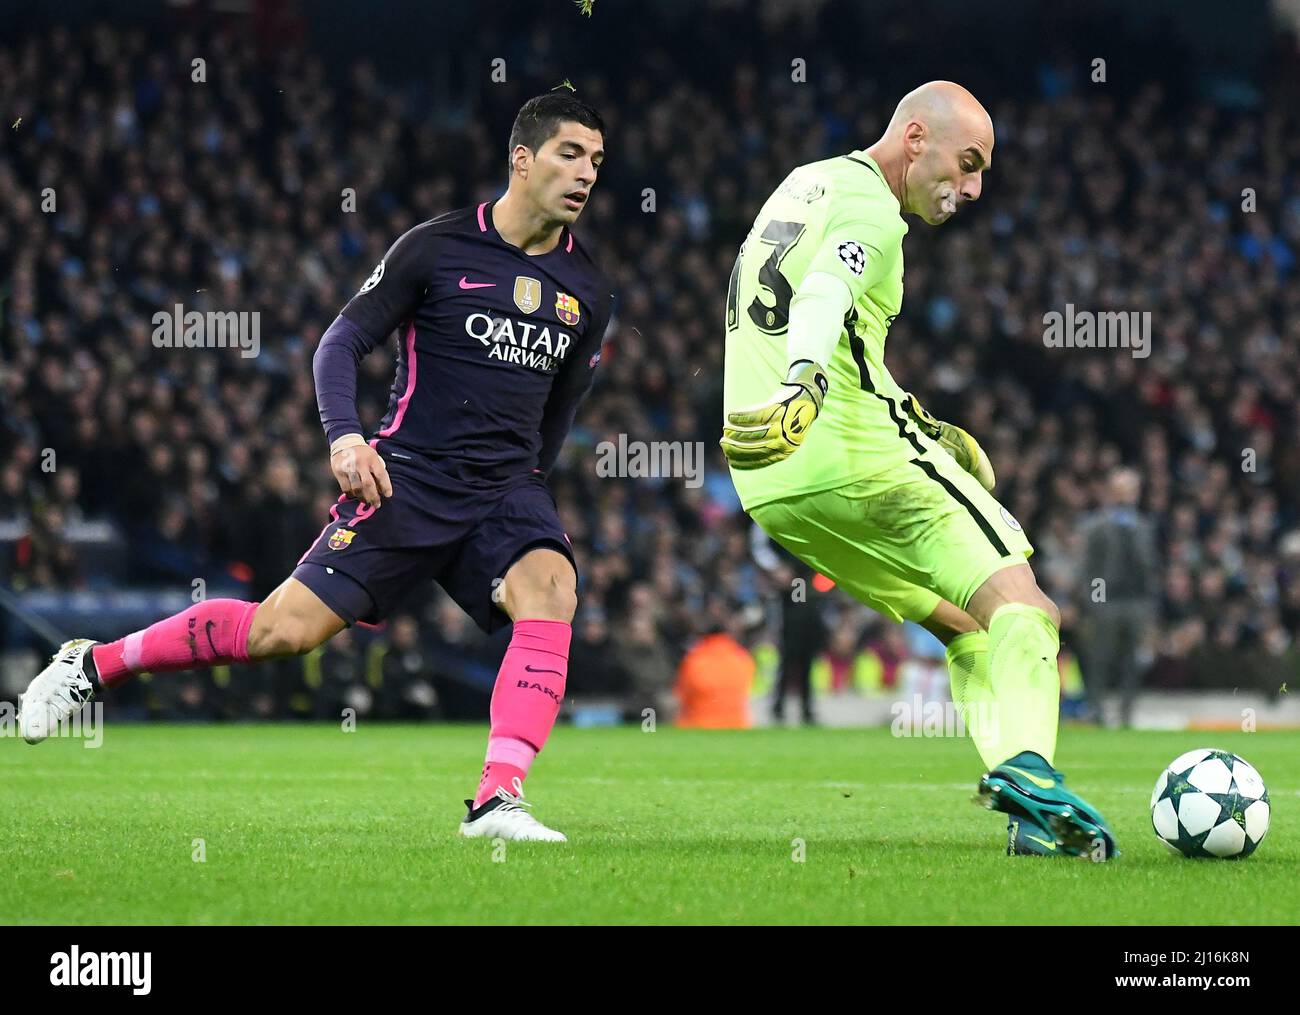 MANCHESTER, ENGLAND - NOVEMBER 1, 2016: Luis Suarez (L) of Barcelona and Willi Caballero (R) of City pictured in action during the UEFA Champions League Group C game between Manchester City and FC Barcelona at City of Manchester Stadium. Copyright: Cosmin Iftode/Picstaff Stock Photo